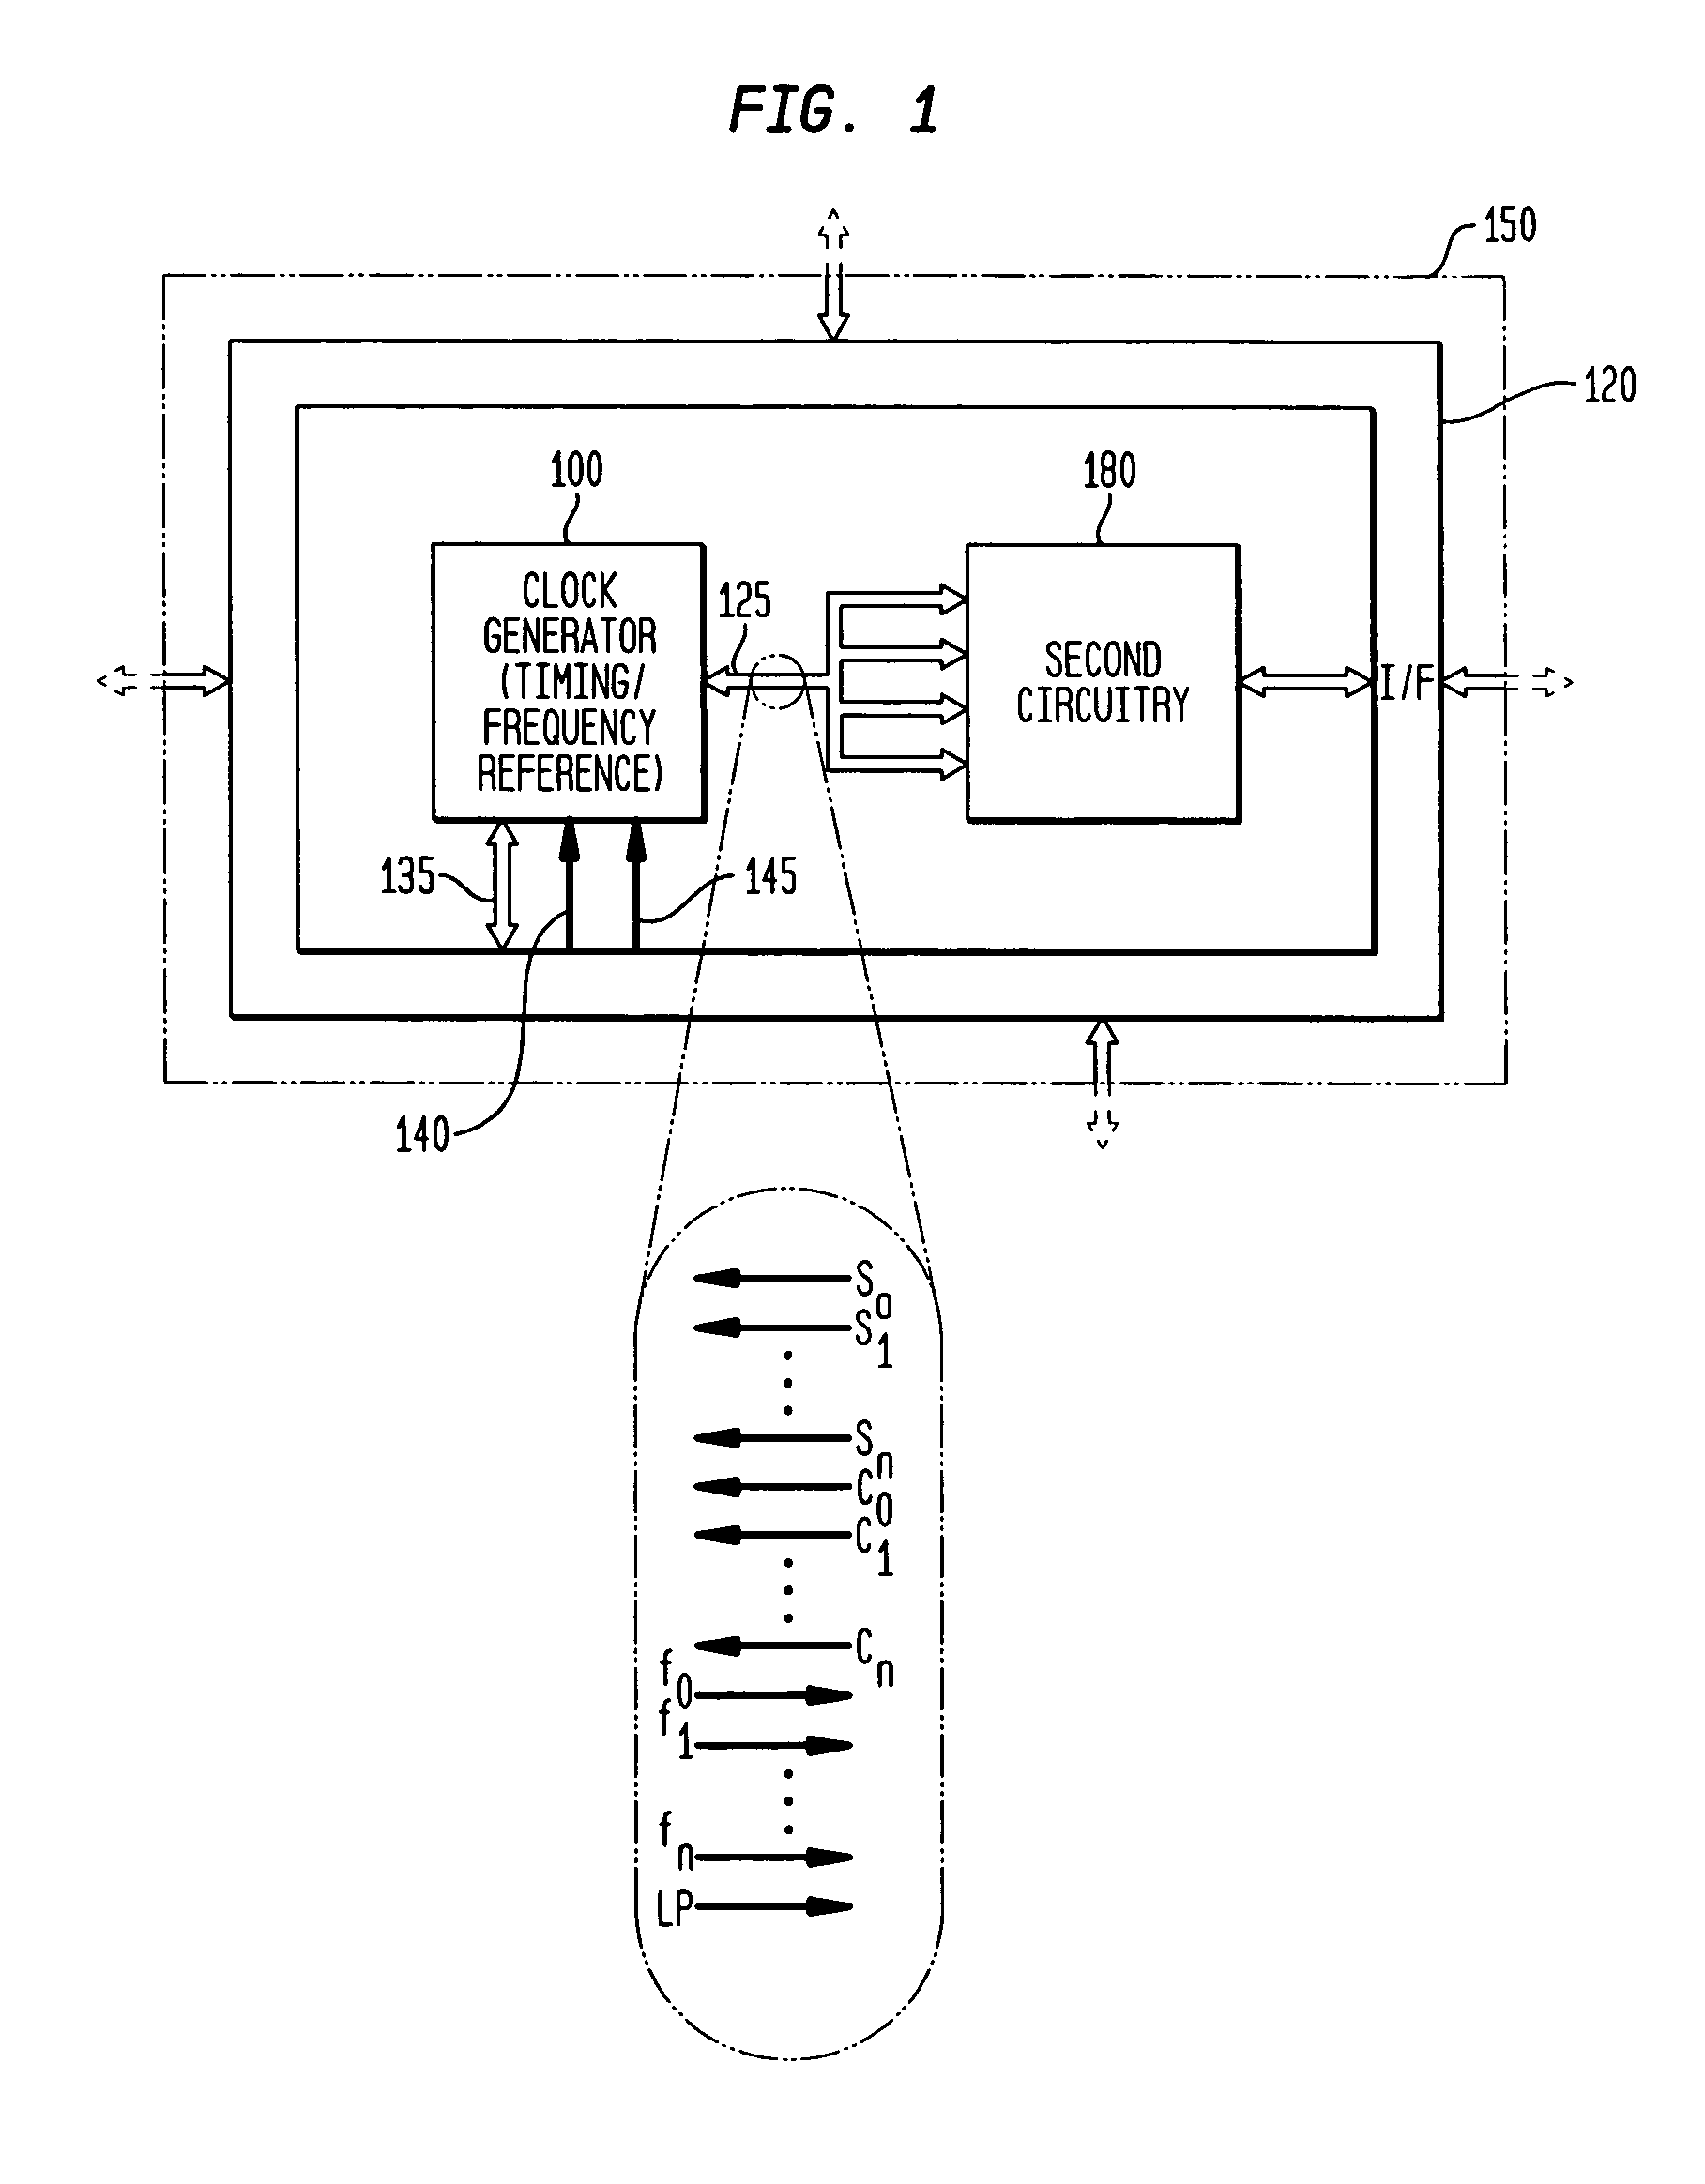 Integrated clock generator and timing/frequency reference